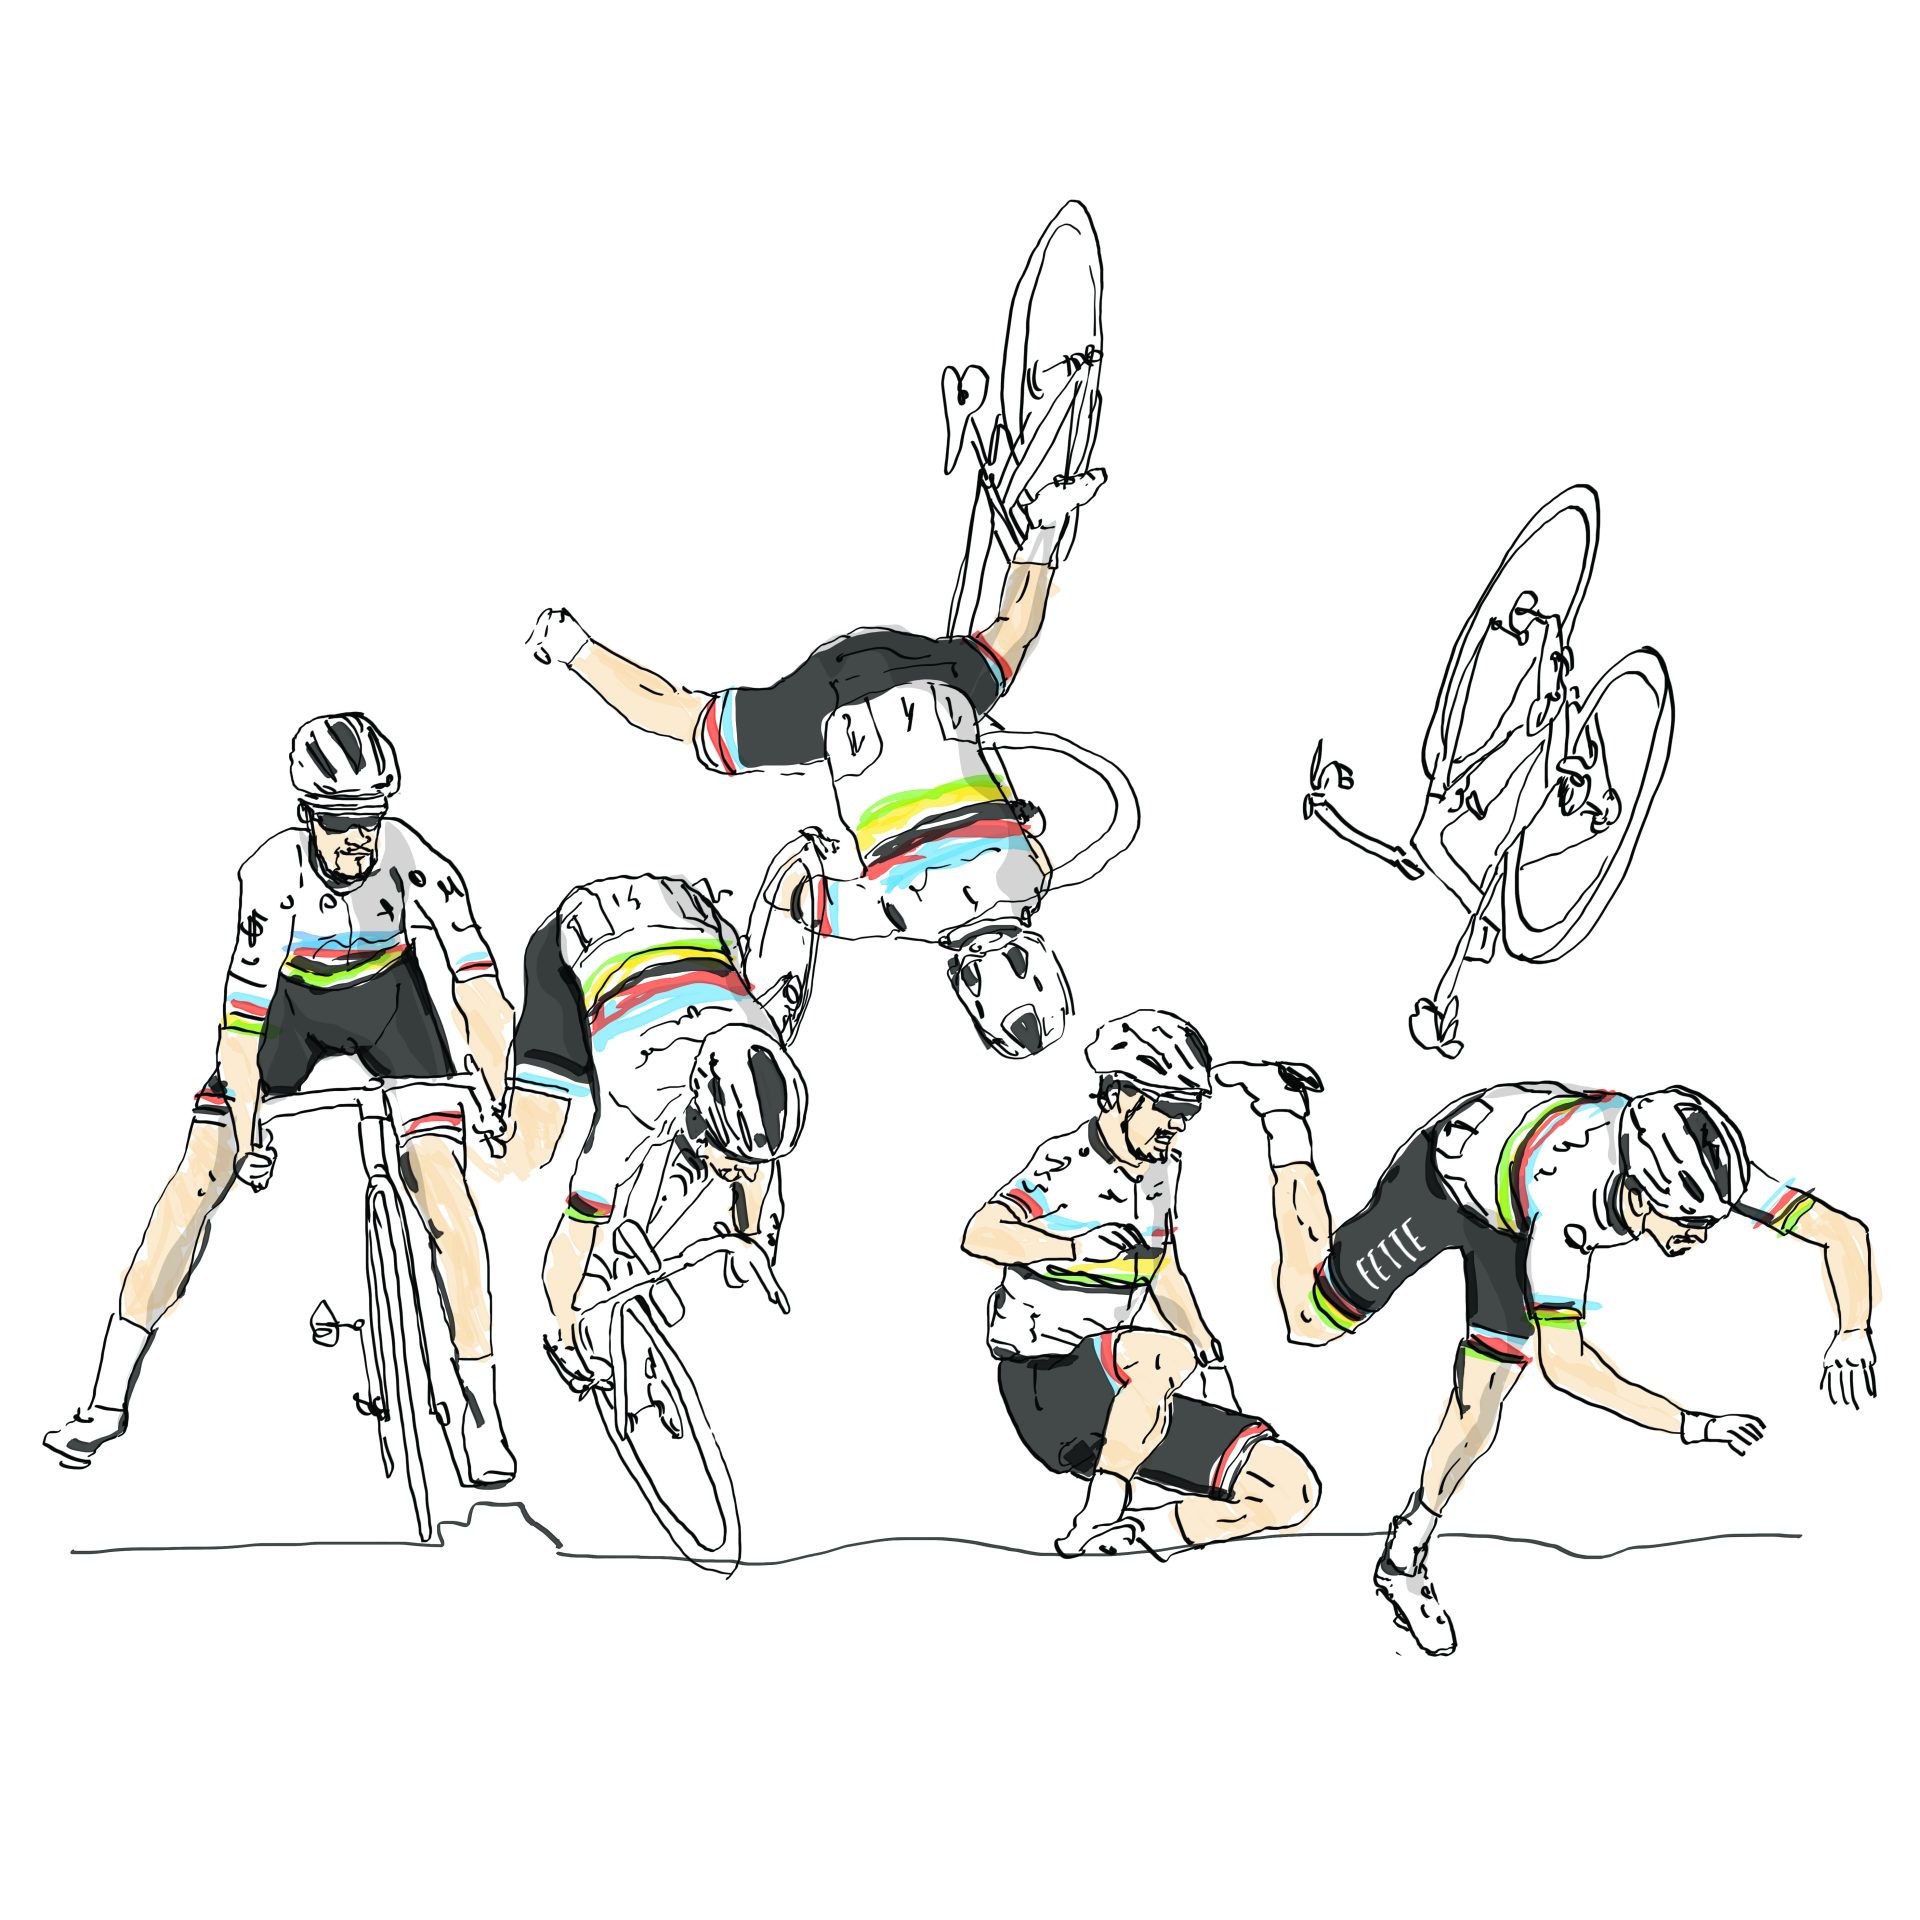 A Fette illustration of then-World Champion Julian Alaphilippe crashing at Strade Bianche. He's shown in a sequence that evokes video screengrabs: right foot unclipped but still on the bike; starting to fall in an endo; fully flipping upside down; and then two of him somehow improbably landing on his feet but them tumbling again. The bike is in the air above him. The only color in the illustration that's not black and white are the rainbow bands of his jersey on the chest and sleeve cuffs and at his shorts hem. In a clever touch, the "sponsor" logo on his shorts reads "Fette."